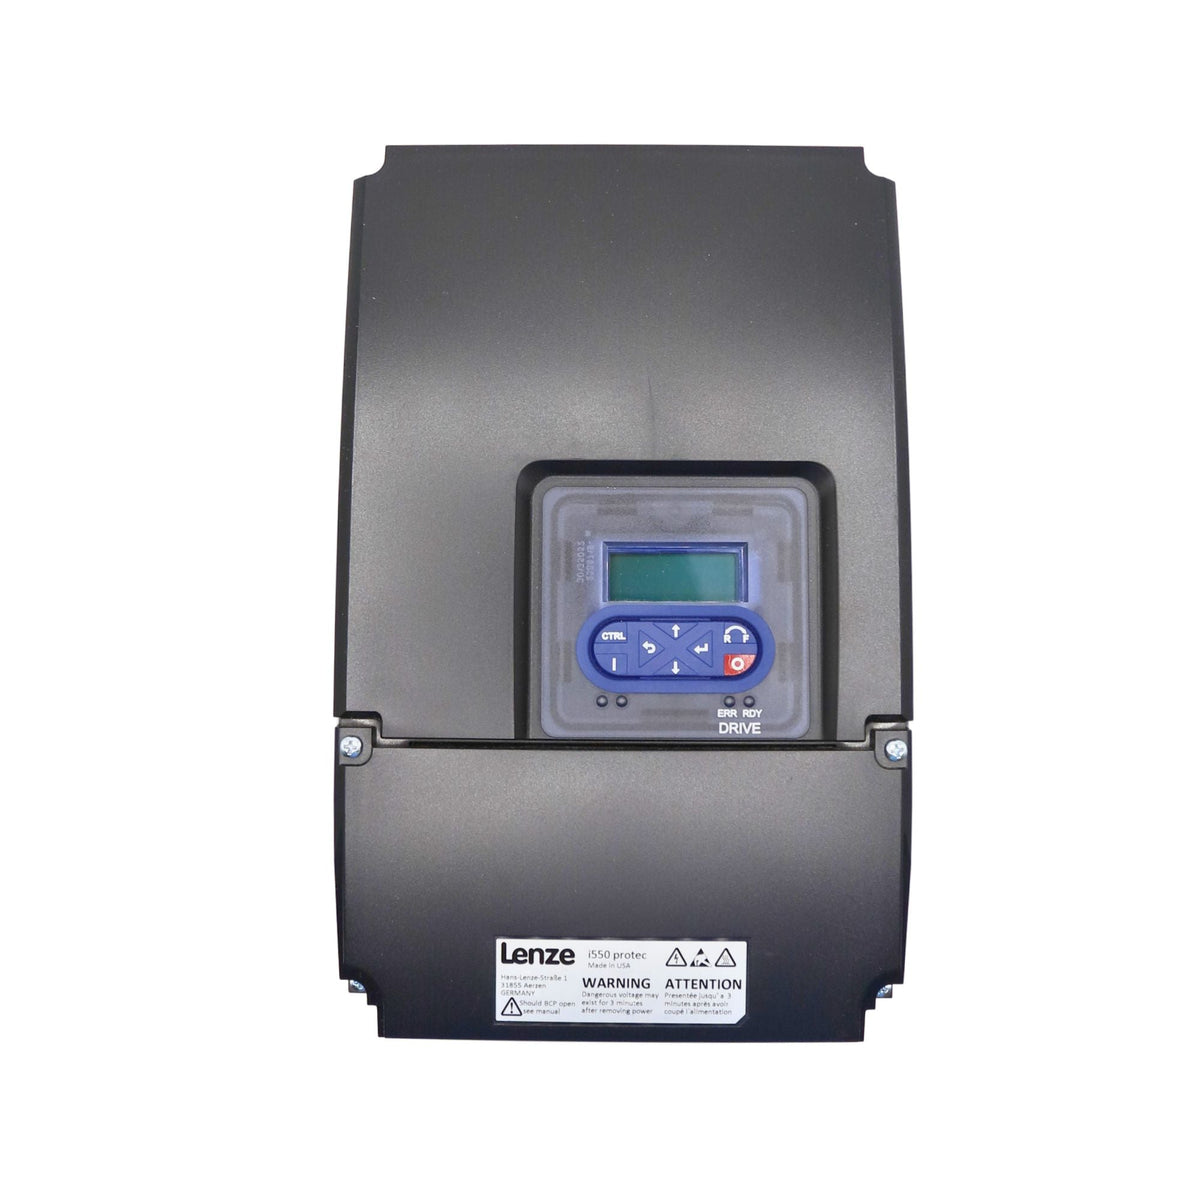 Lenze | I550 Protec 10hp Wall Mount, Nema 4x rated, Keypad, Incremental encoder (HTL) via two digital inputs, 5digital inputs, 2 analog inputs, 1 digital output 1 analog Output, 1 relay | I55AP275F00711K00S - front view